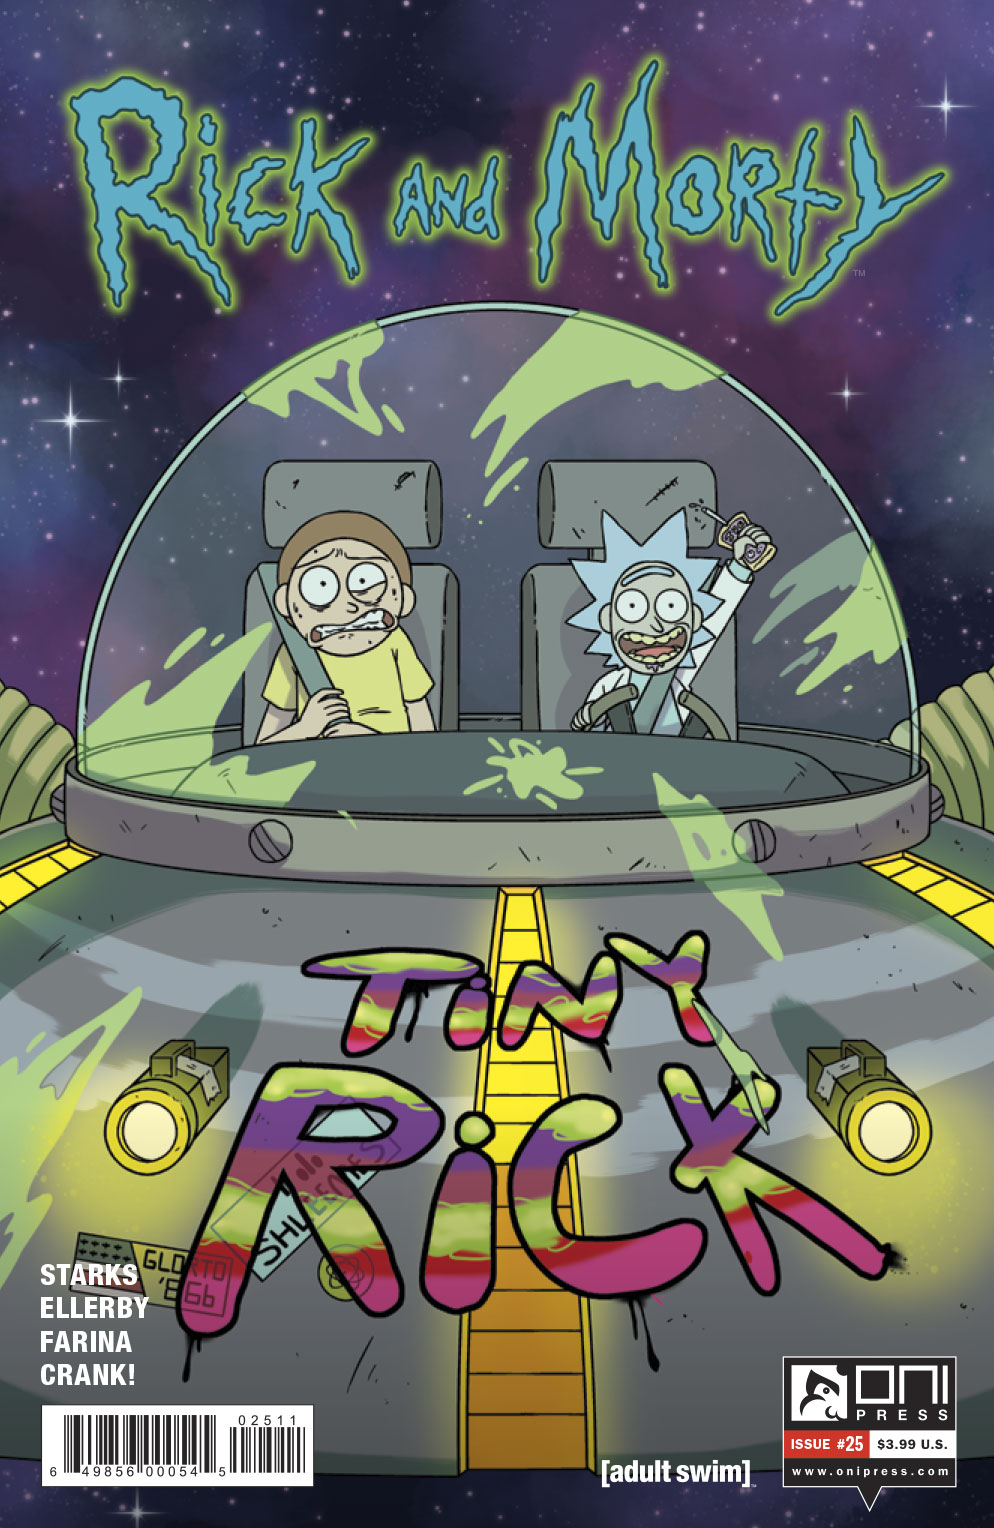 Rick and Morty #25 Review